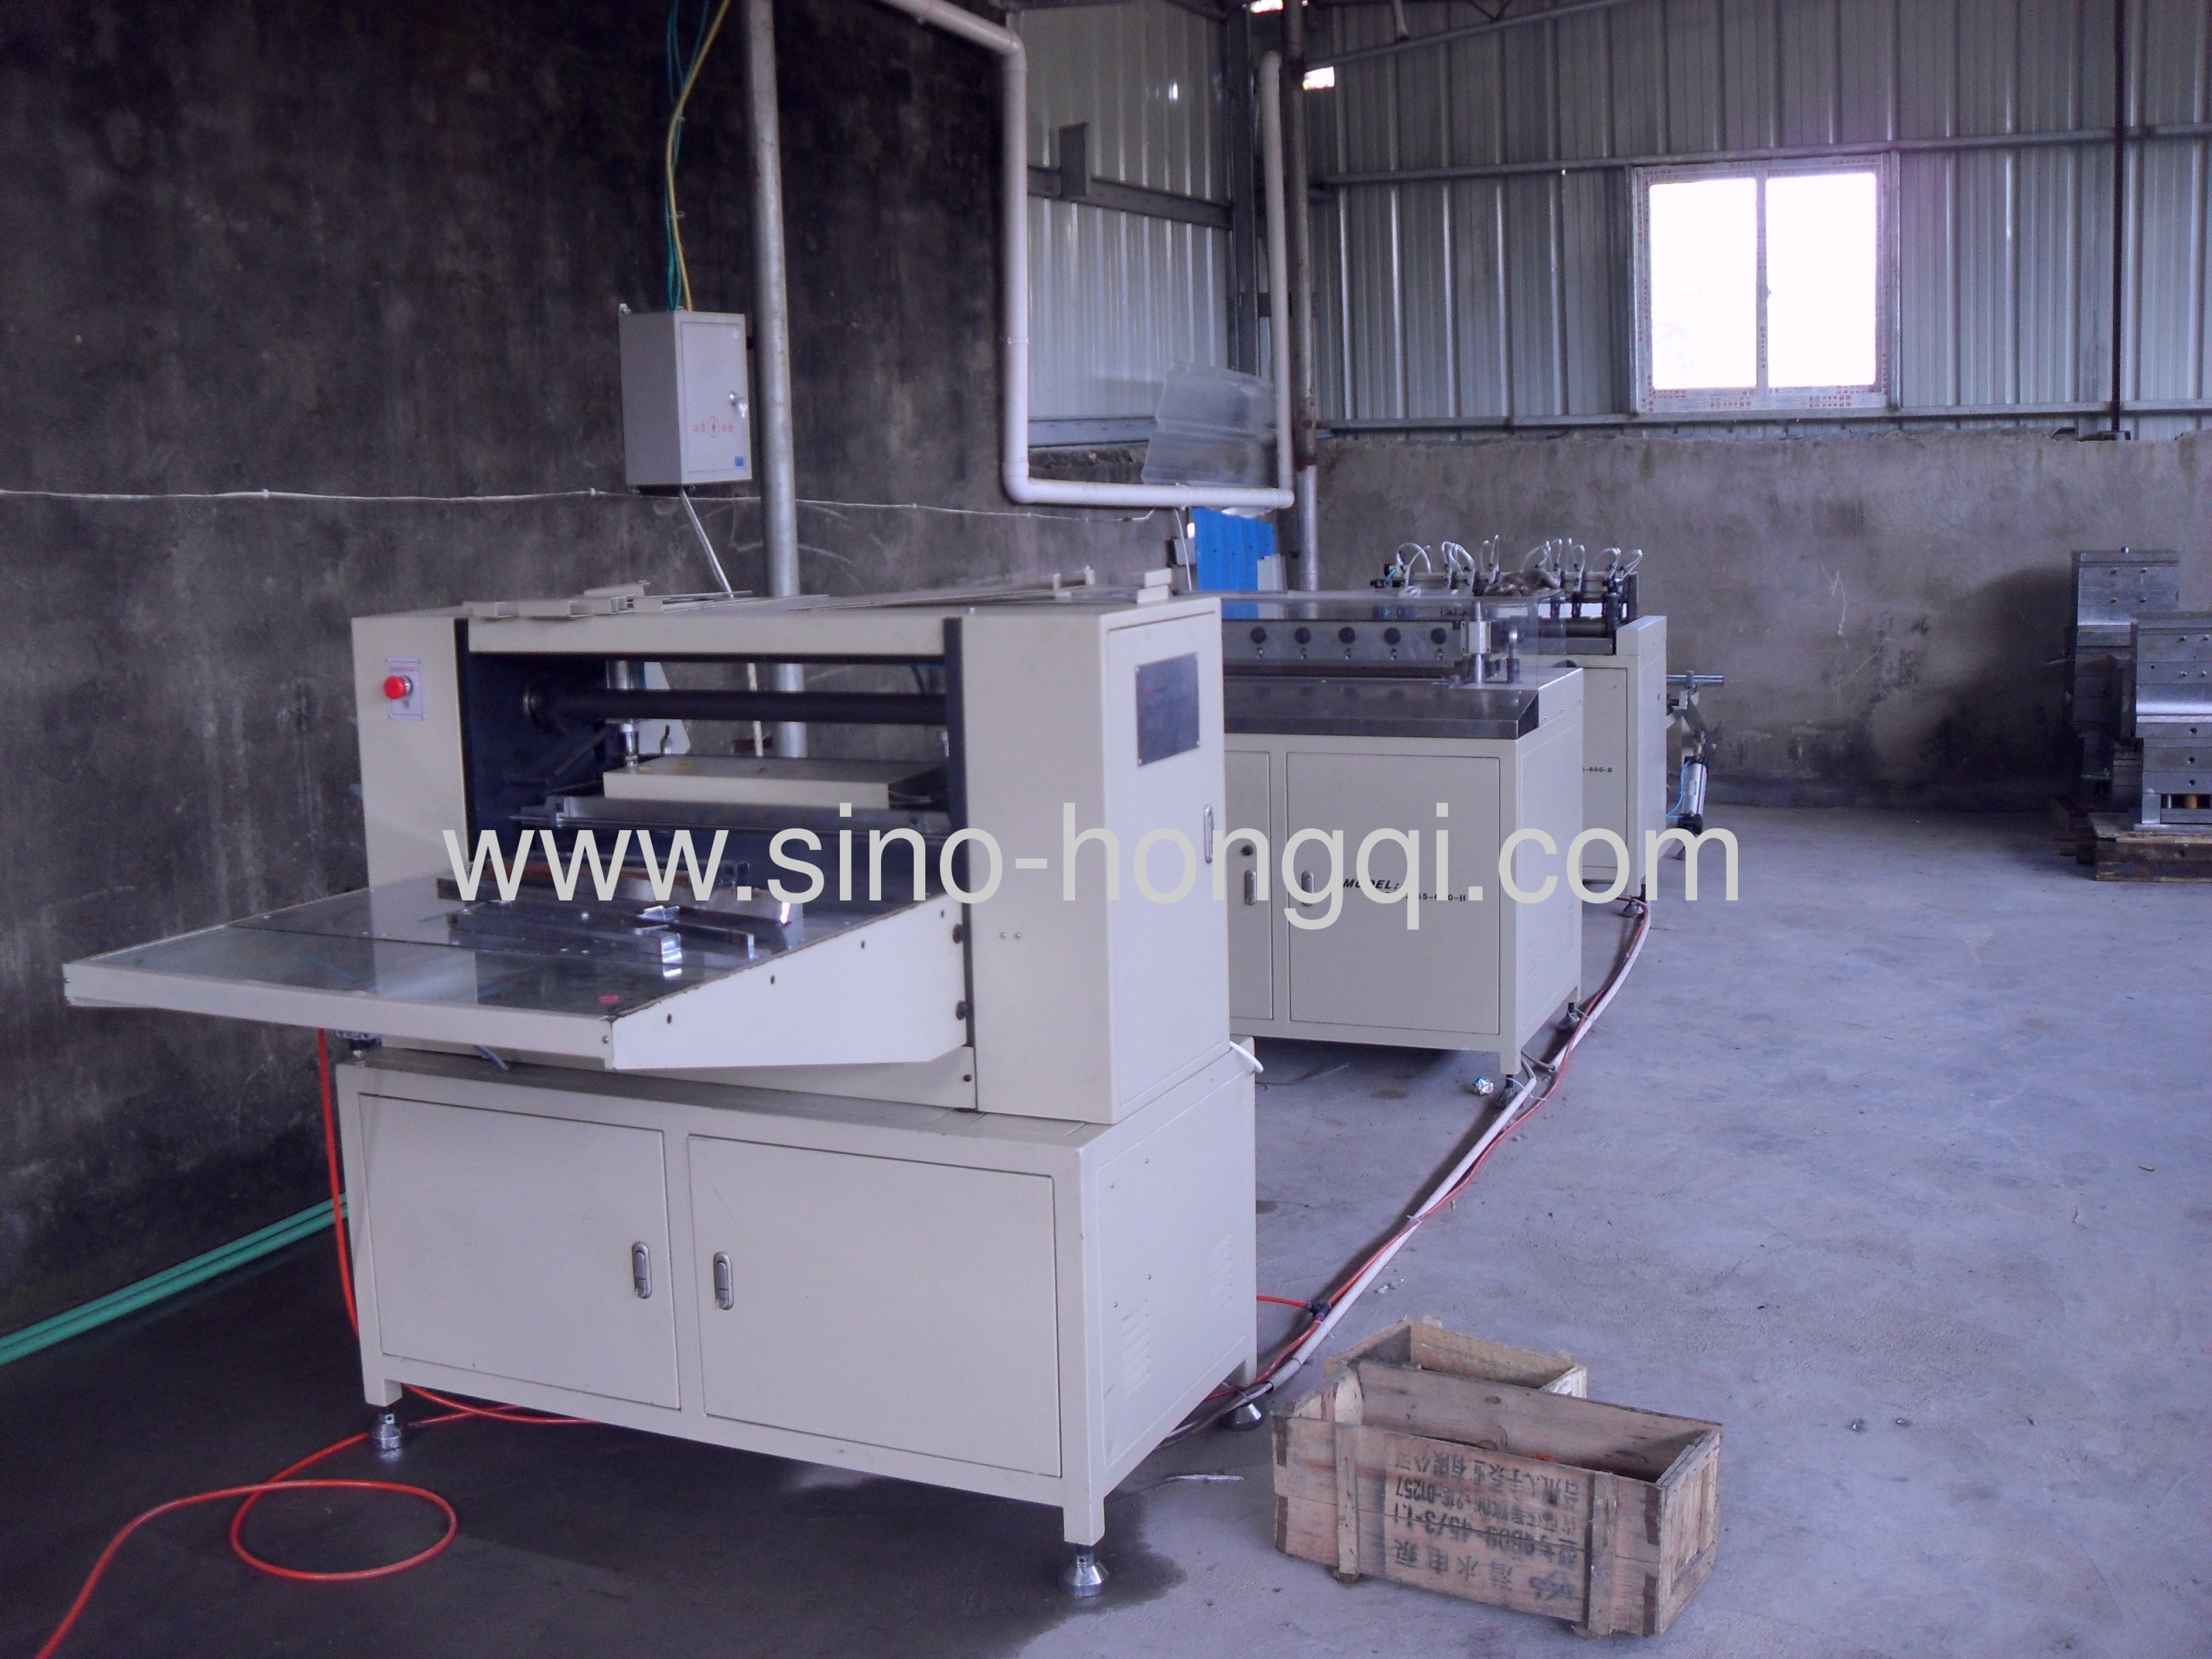 Photo of Our Factory's Equipment